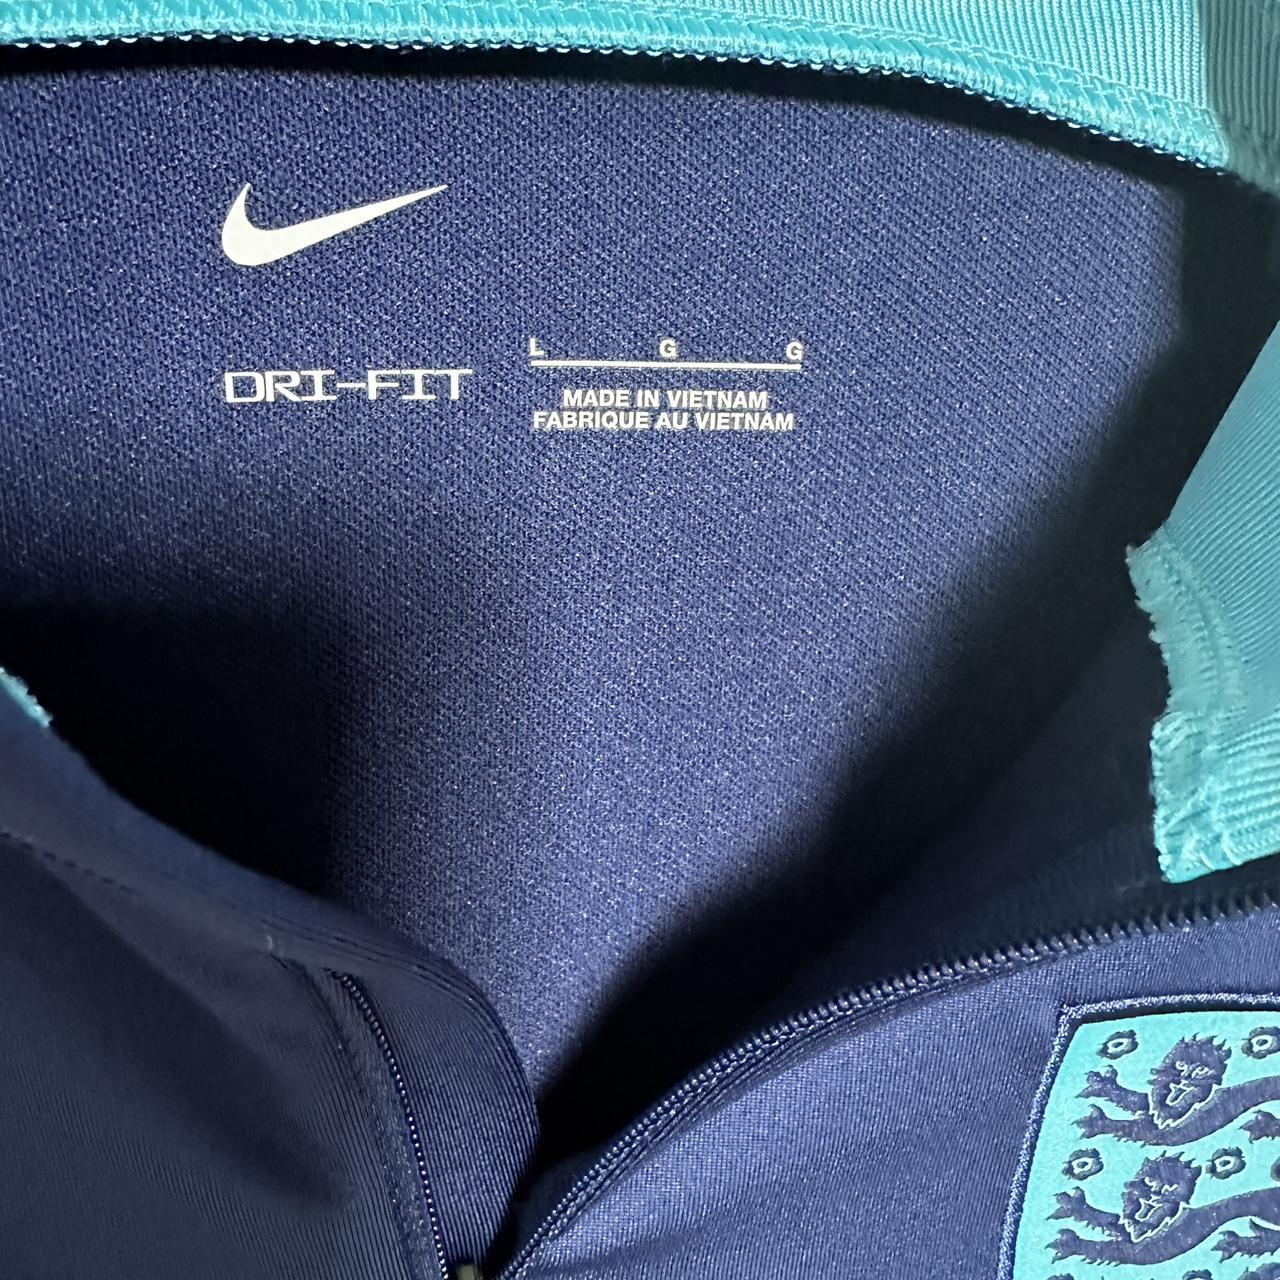 England player issue 2023 training top - Depop